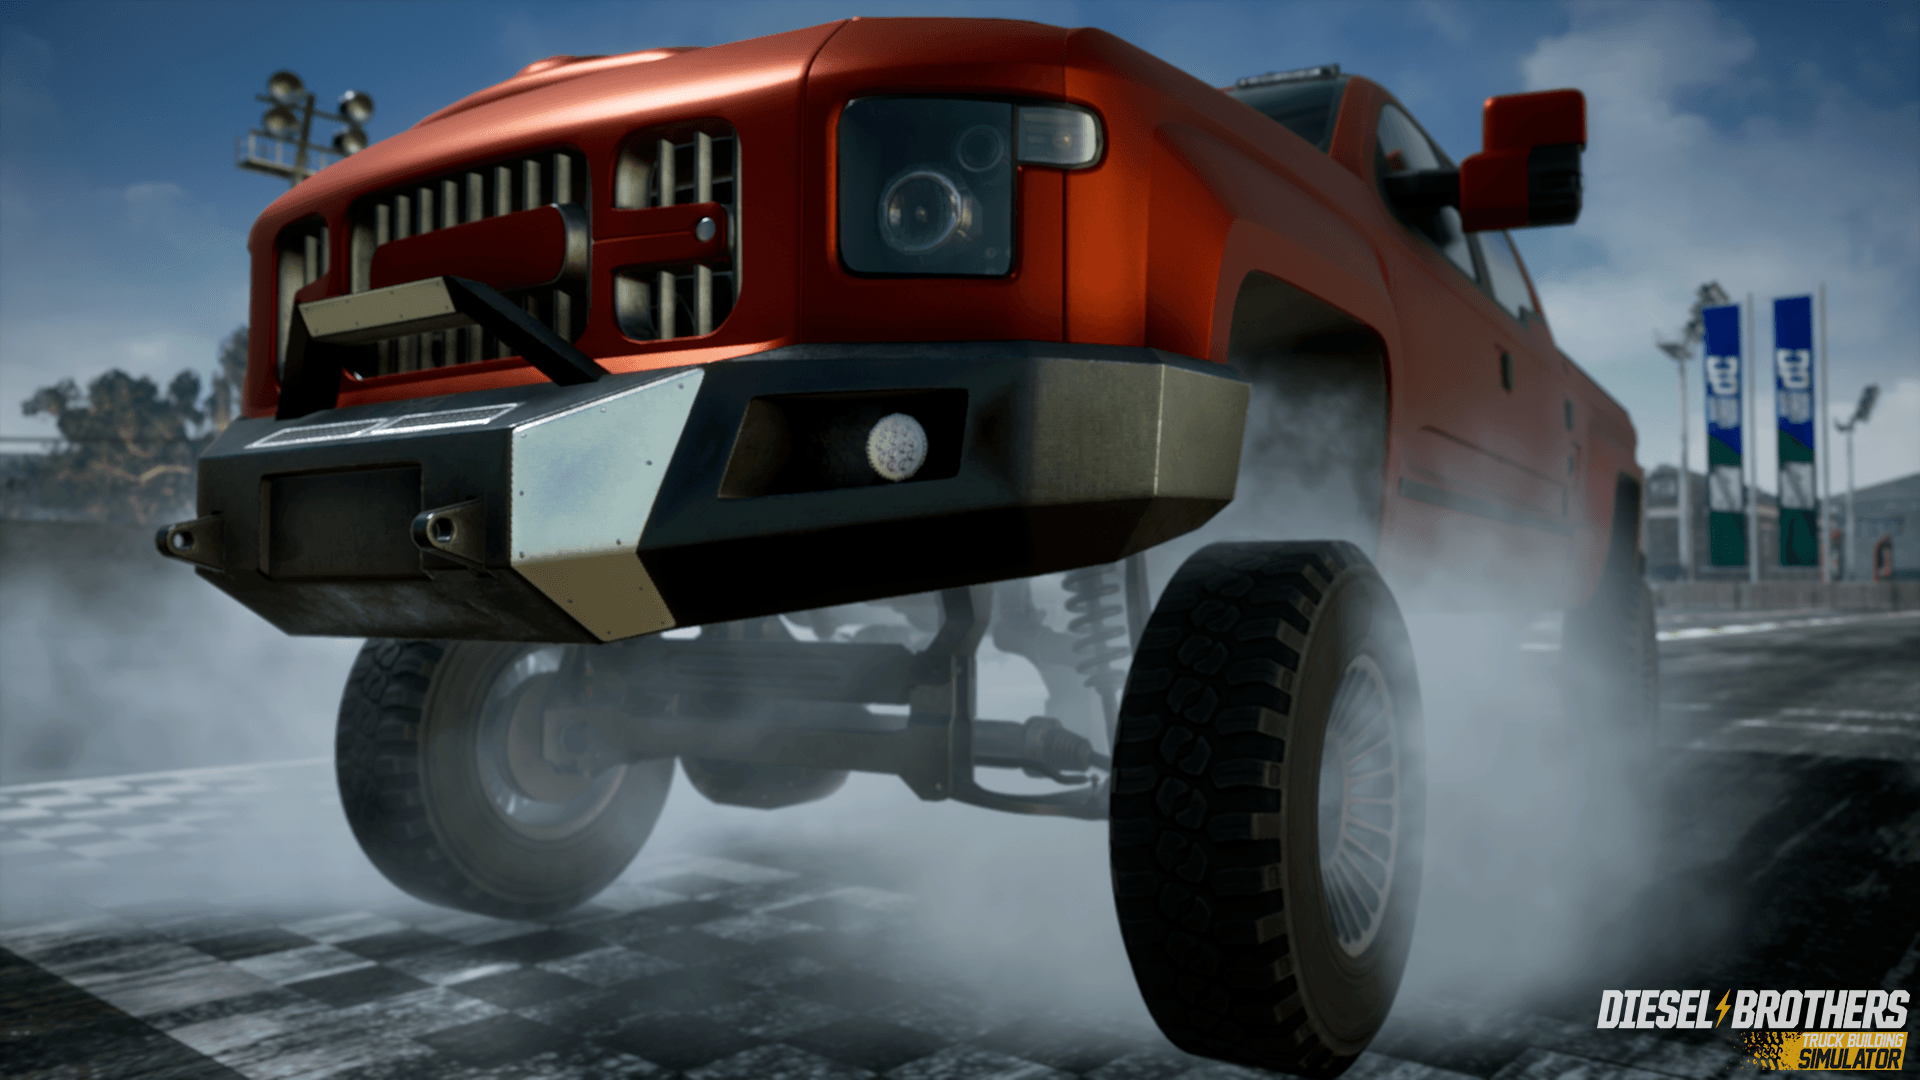 Diesel Brothers: Truck Building Simulator - tuning parts!